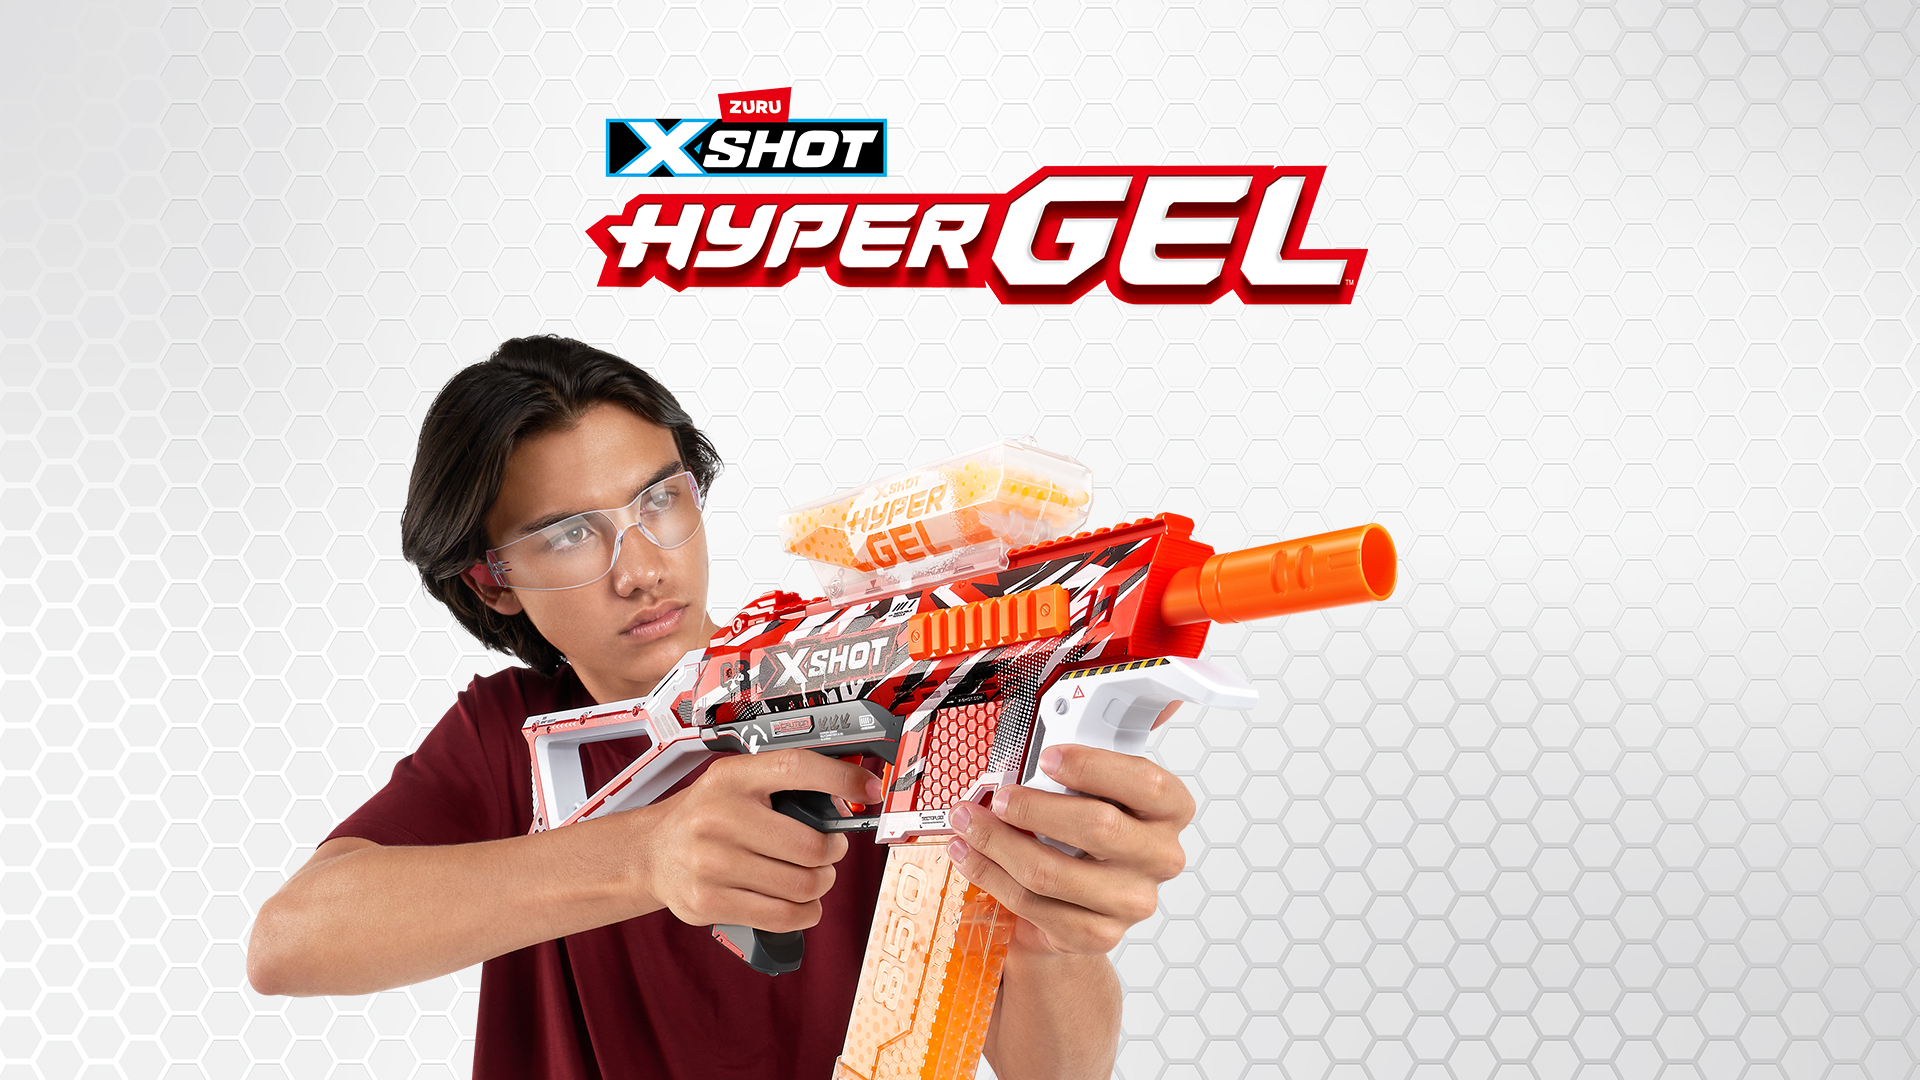 Toy Triangle Launches X-Shot Hyper Gel! – Toy Triangle